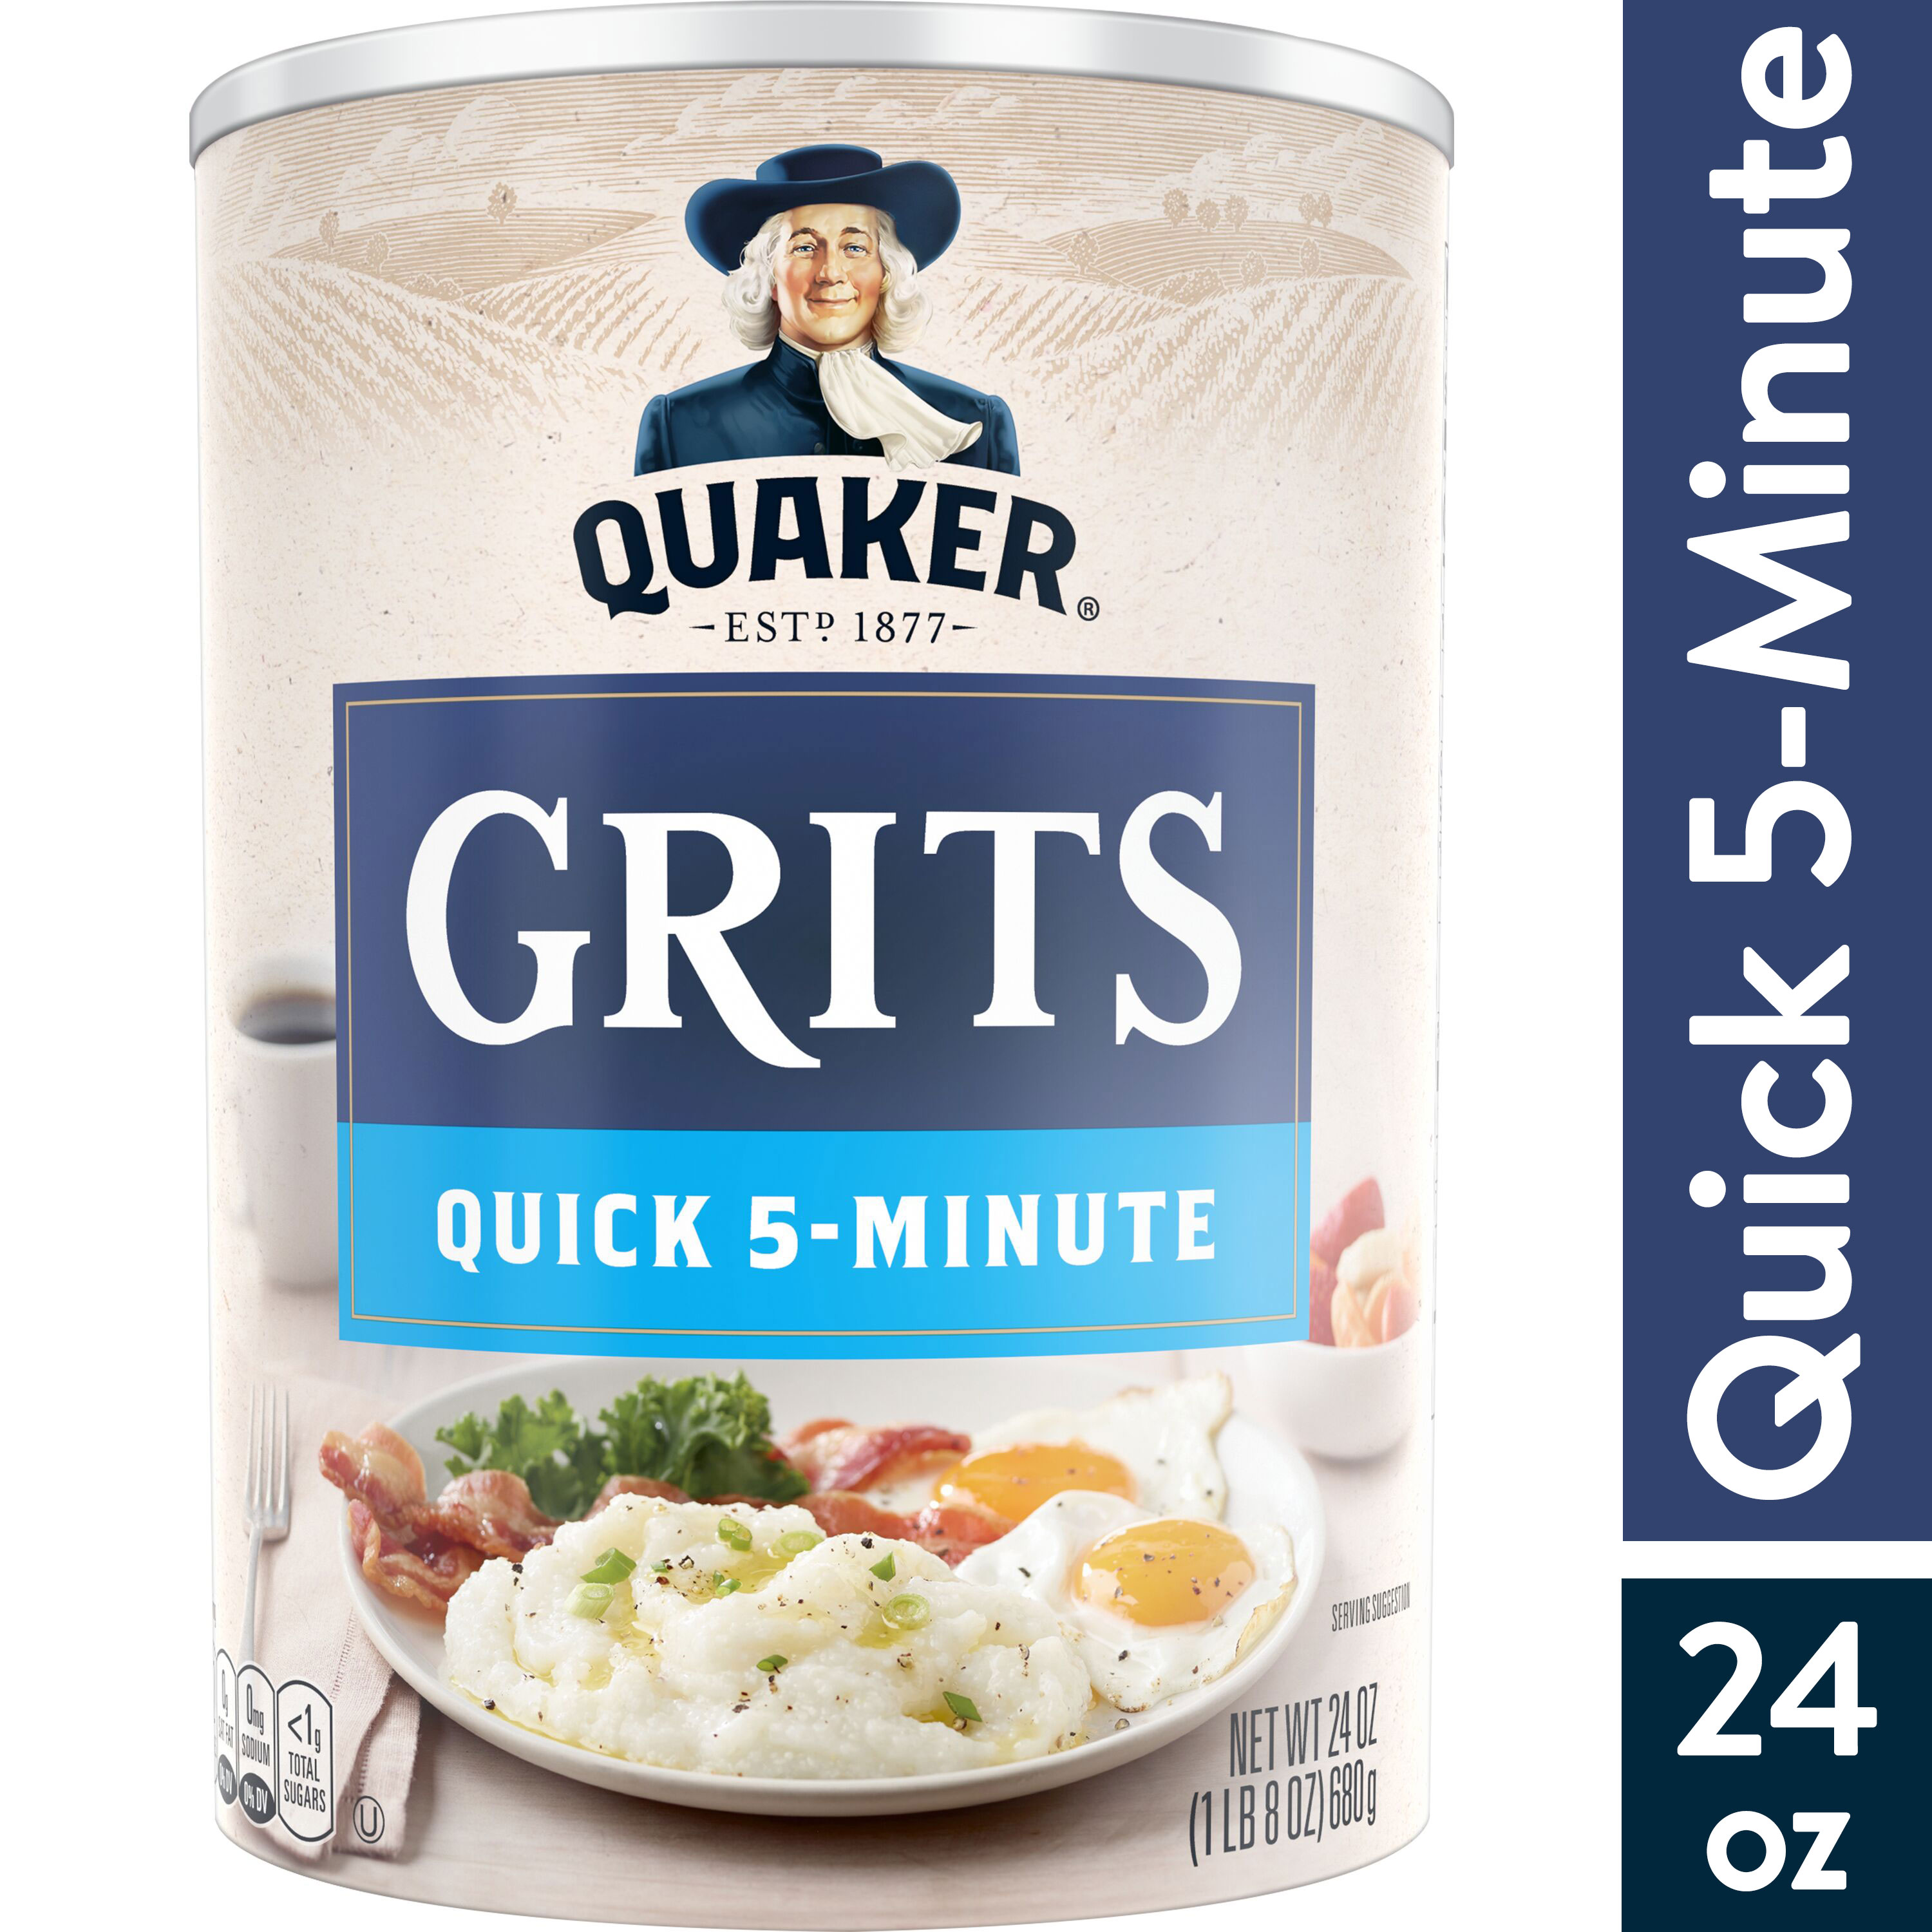 Quaker, Original Quick 5-Minute Grits, Shelf Stable, Ready to Cook, 24 oz Canister - image 1 of 7